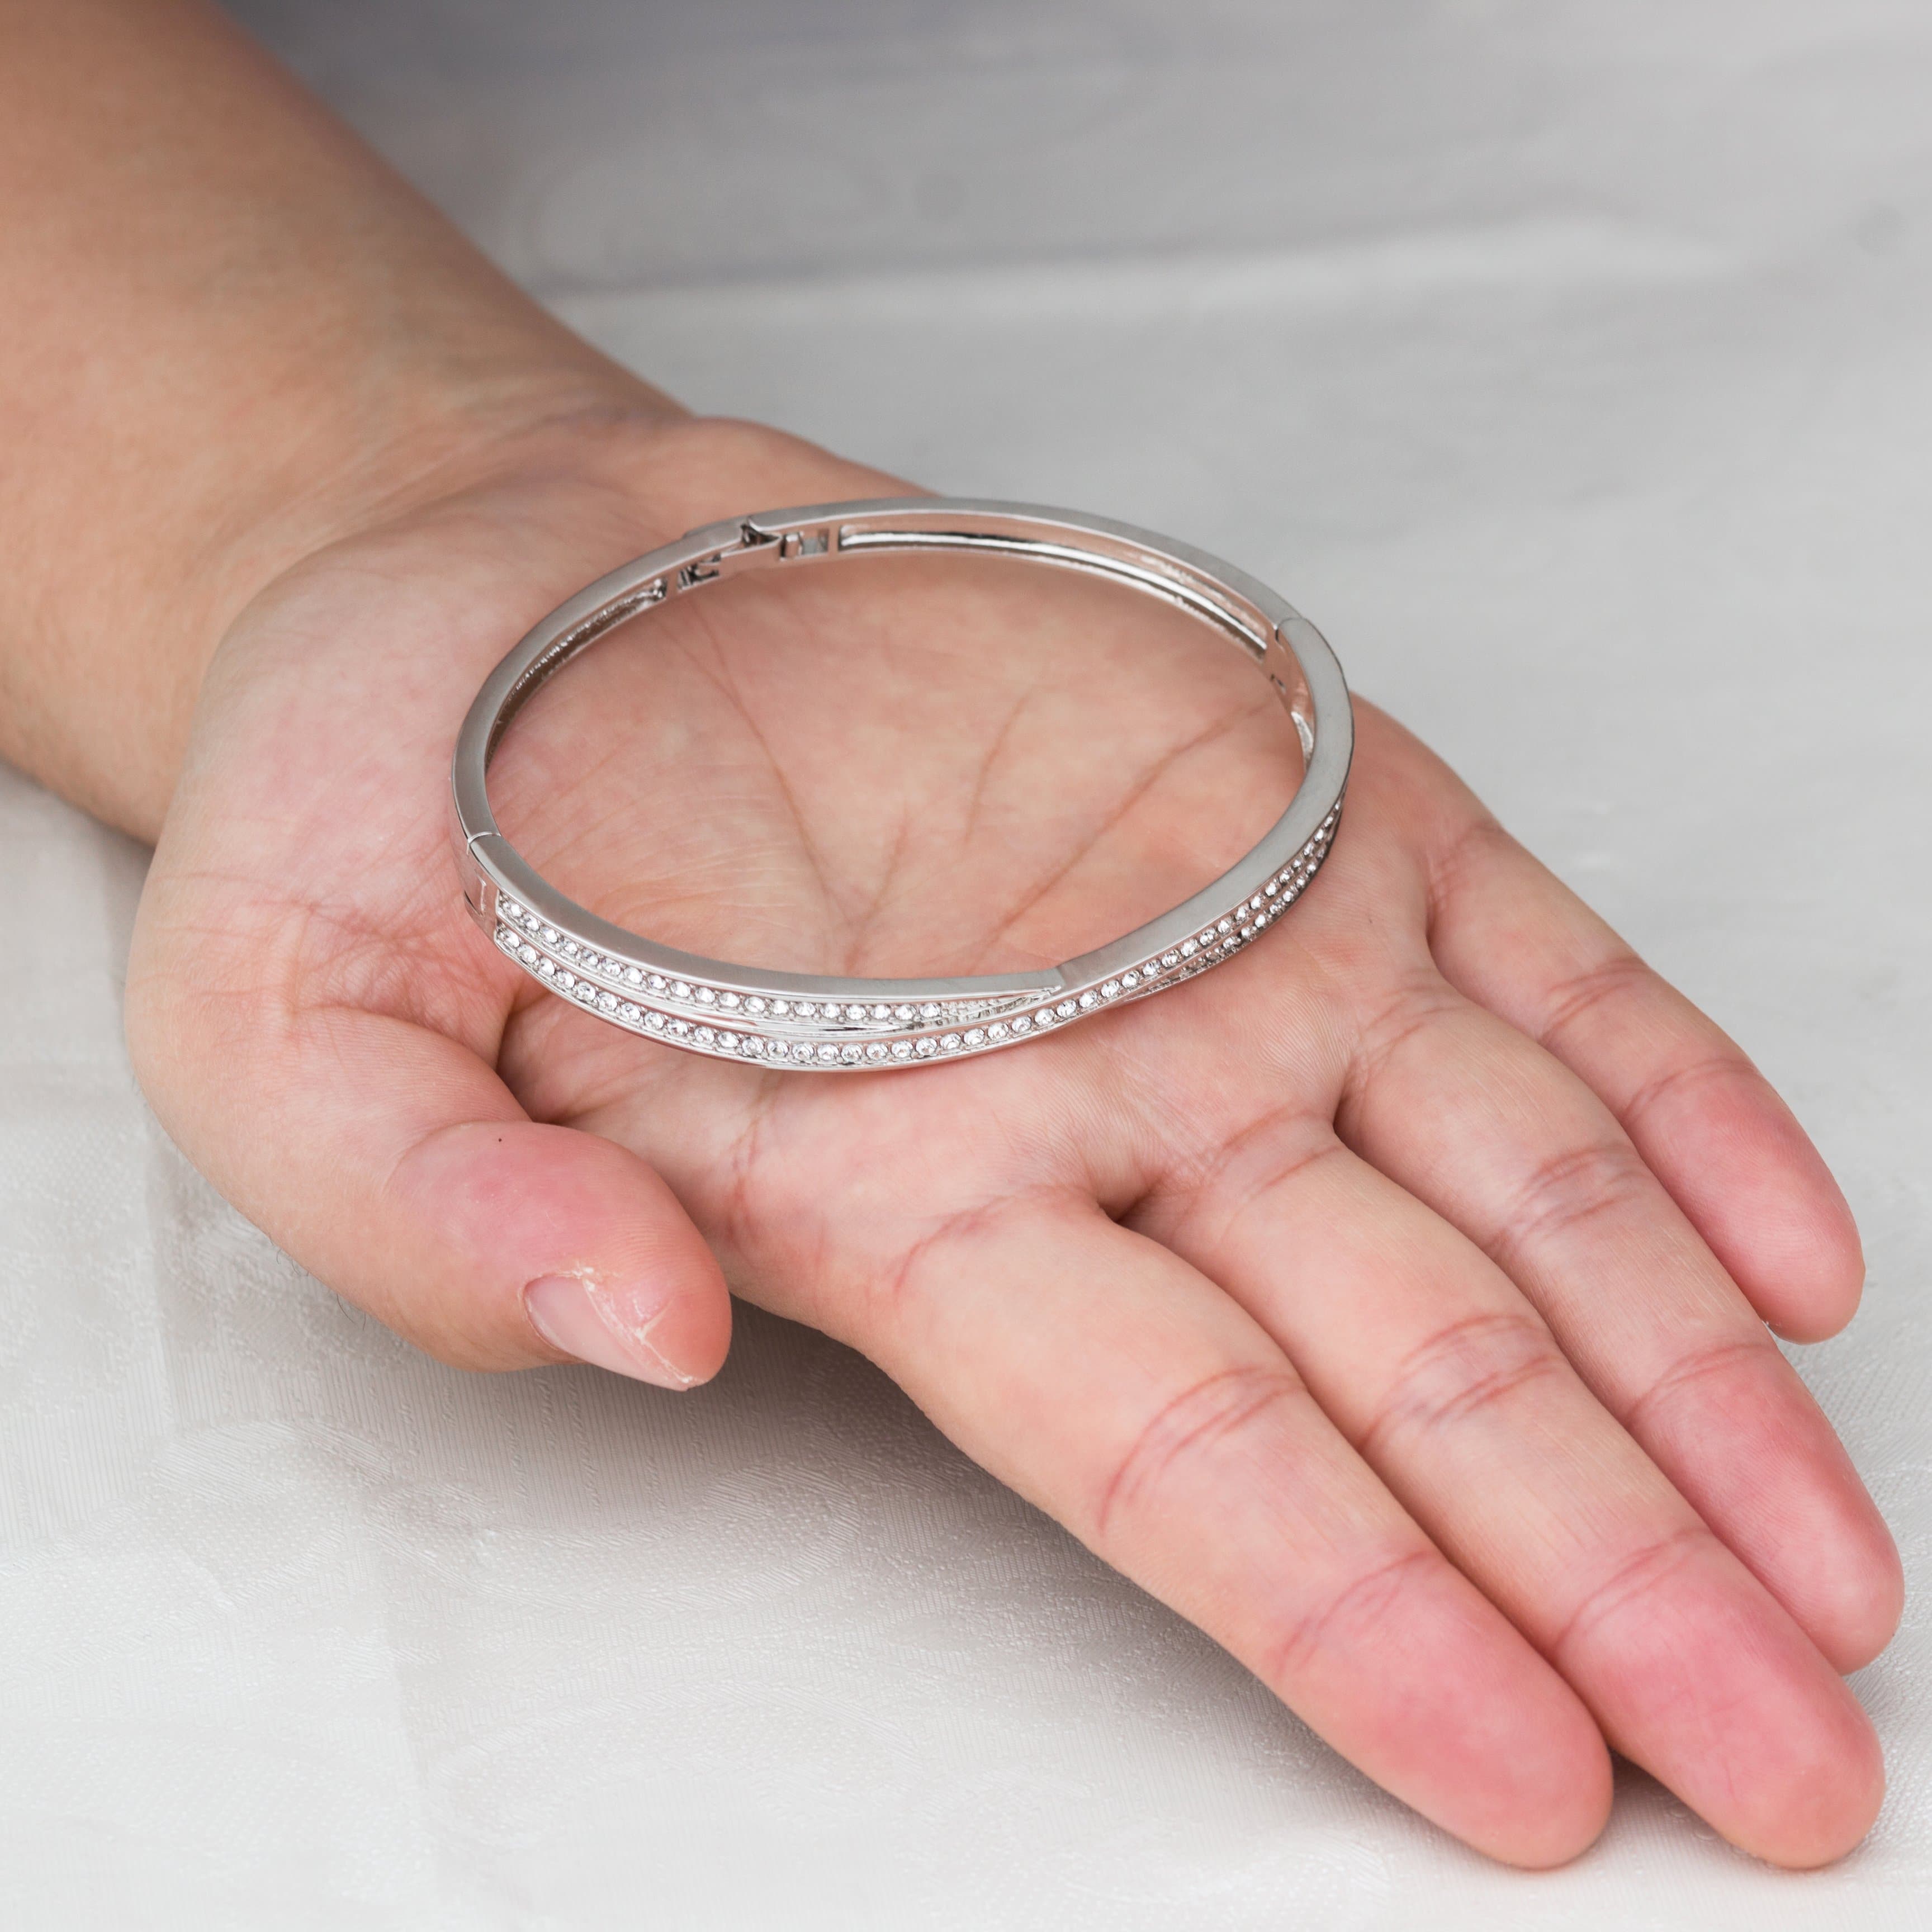 Silver Plated Crossover Bangle Created with Zircondia® Crystals